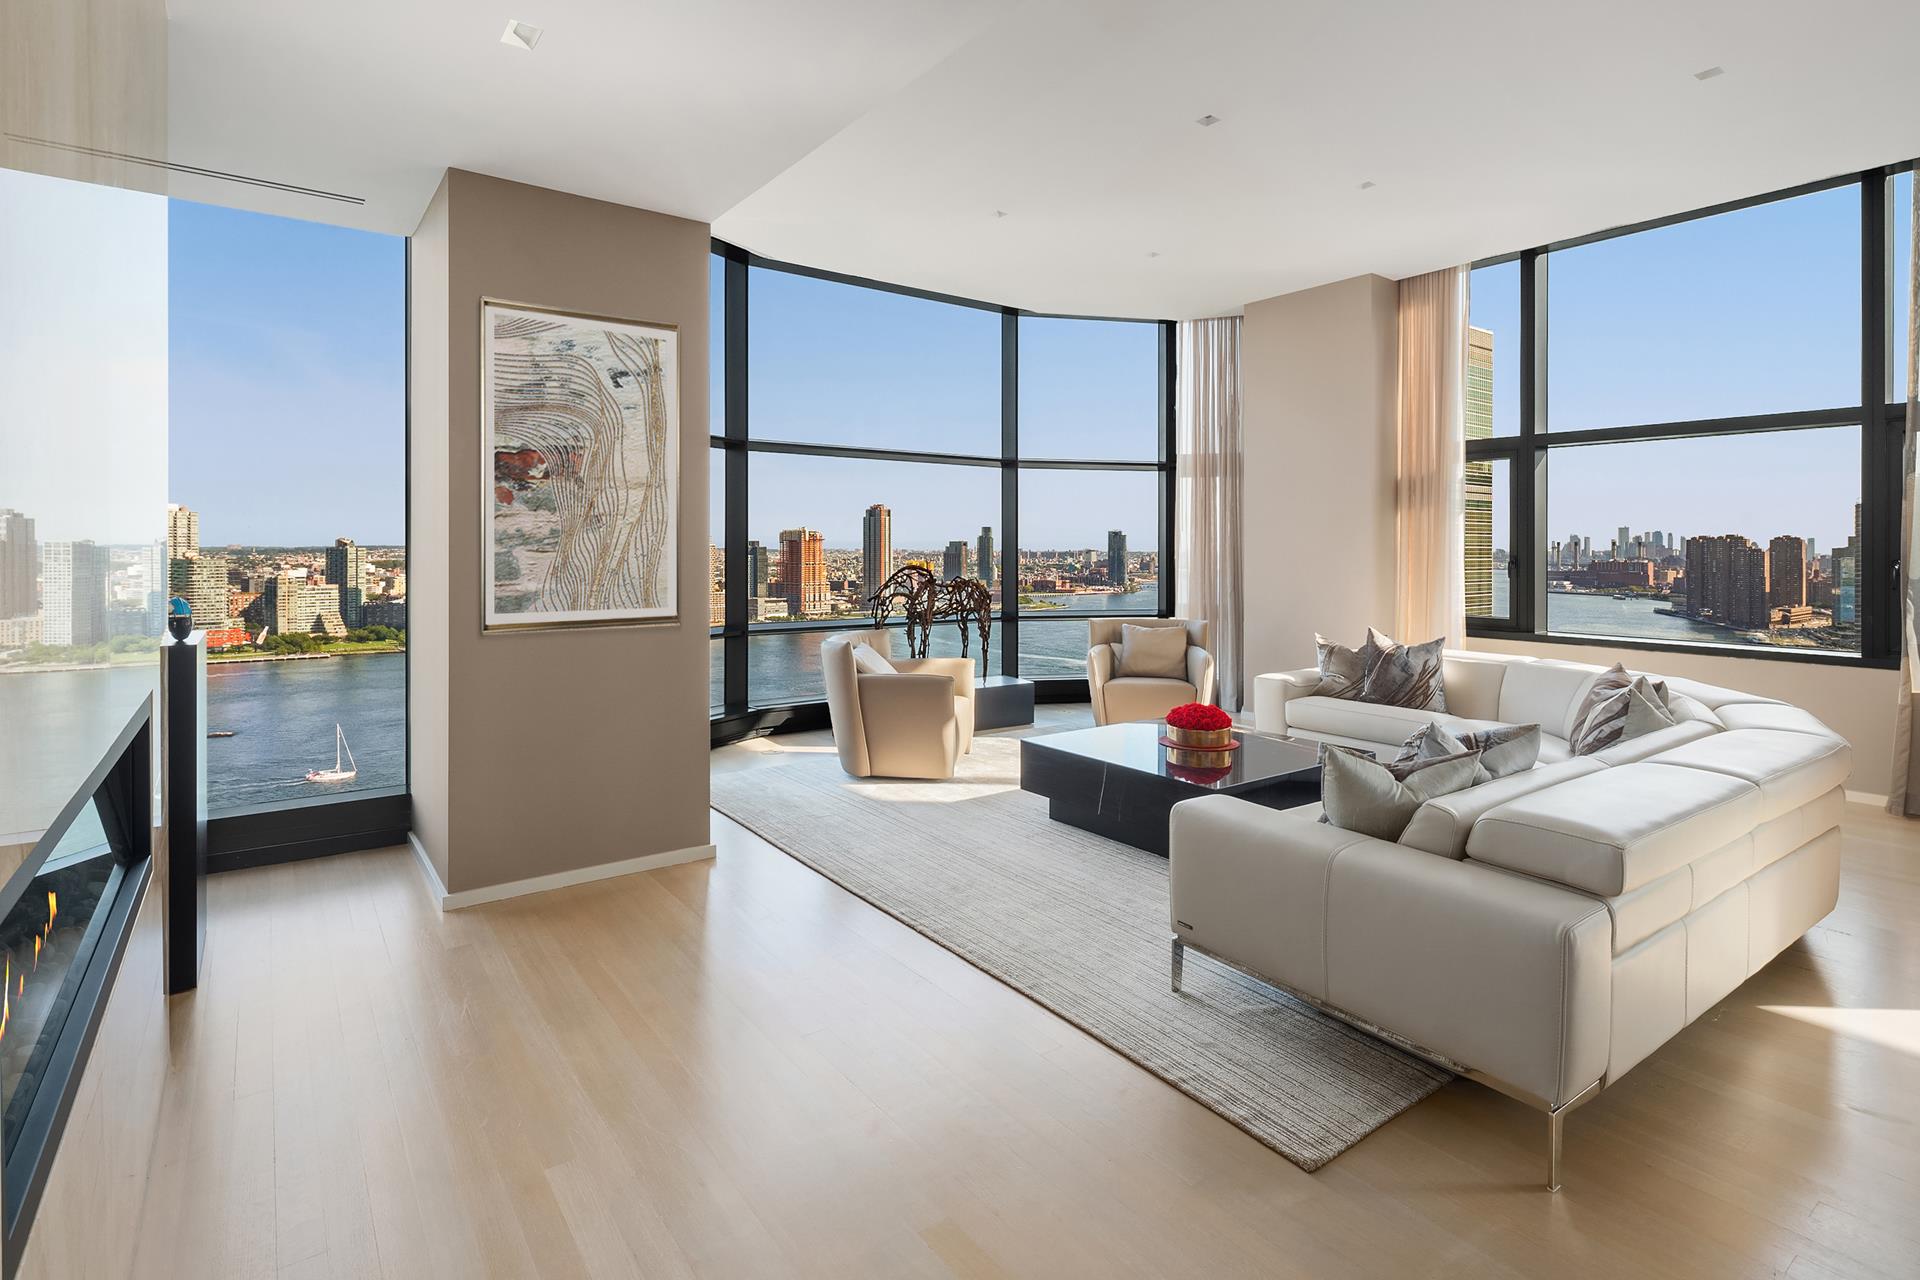 50 United Nations Plaza 27A, Turtle Bay, Midtown East, NYC - 3 Bedrooms  
3 Bathrooms  
6 Rooms - 